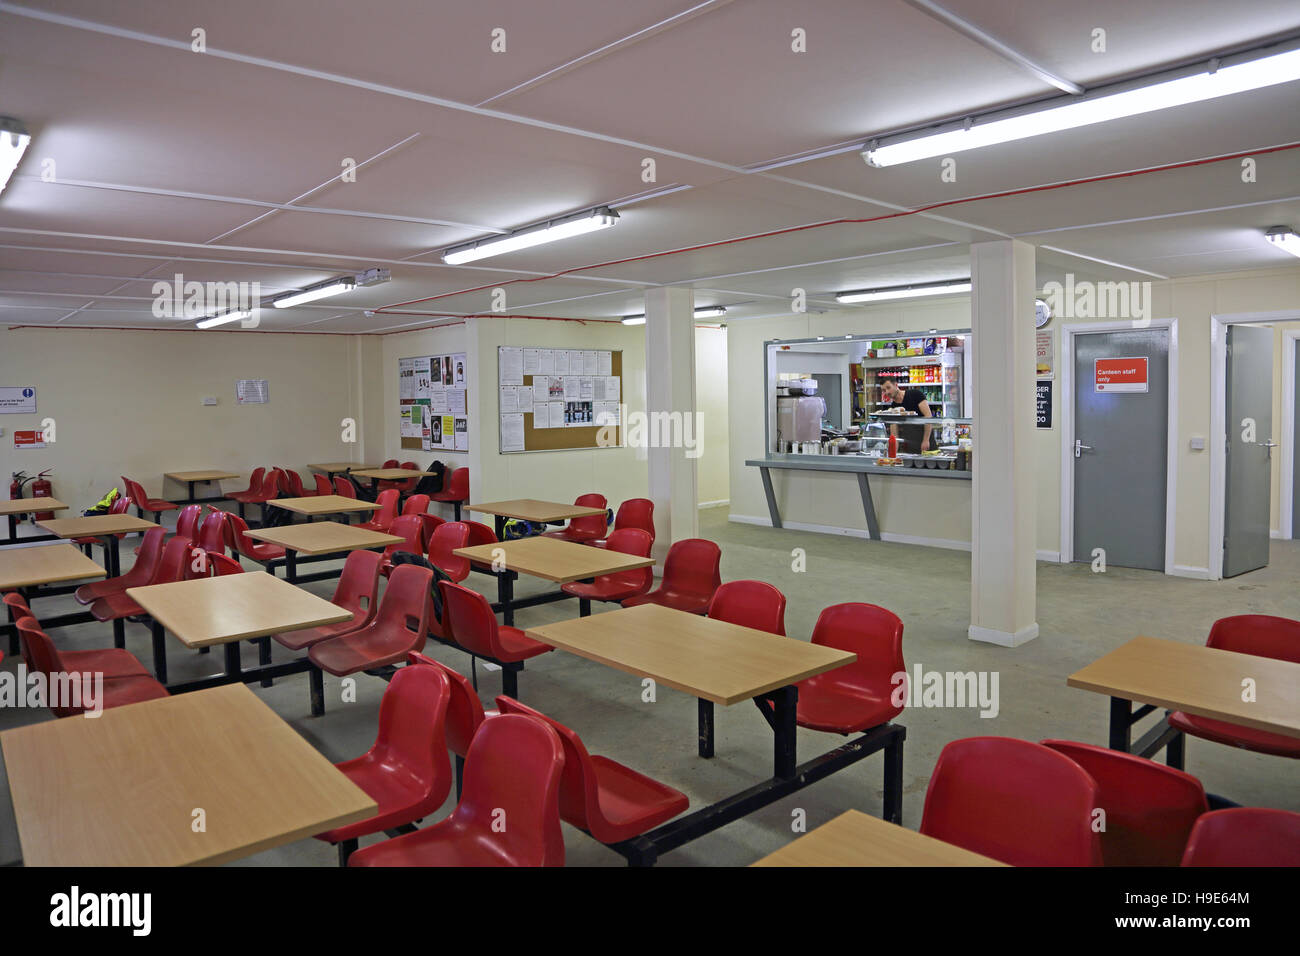 Interior of a temporary workers canteen on a large building site in London, UK. Shows kitchen, servery and seating area Stock Photo